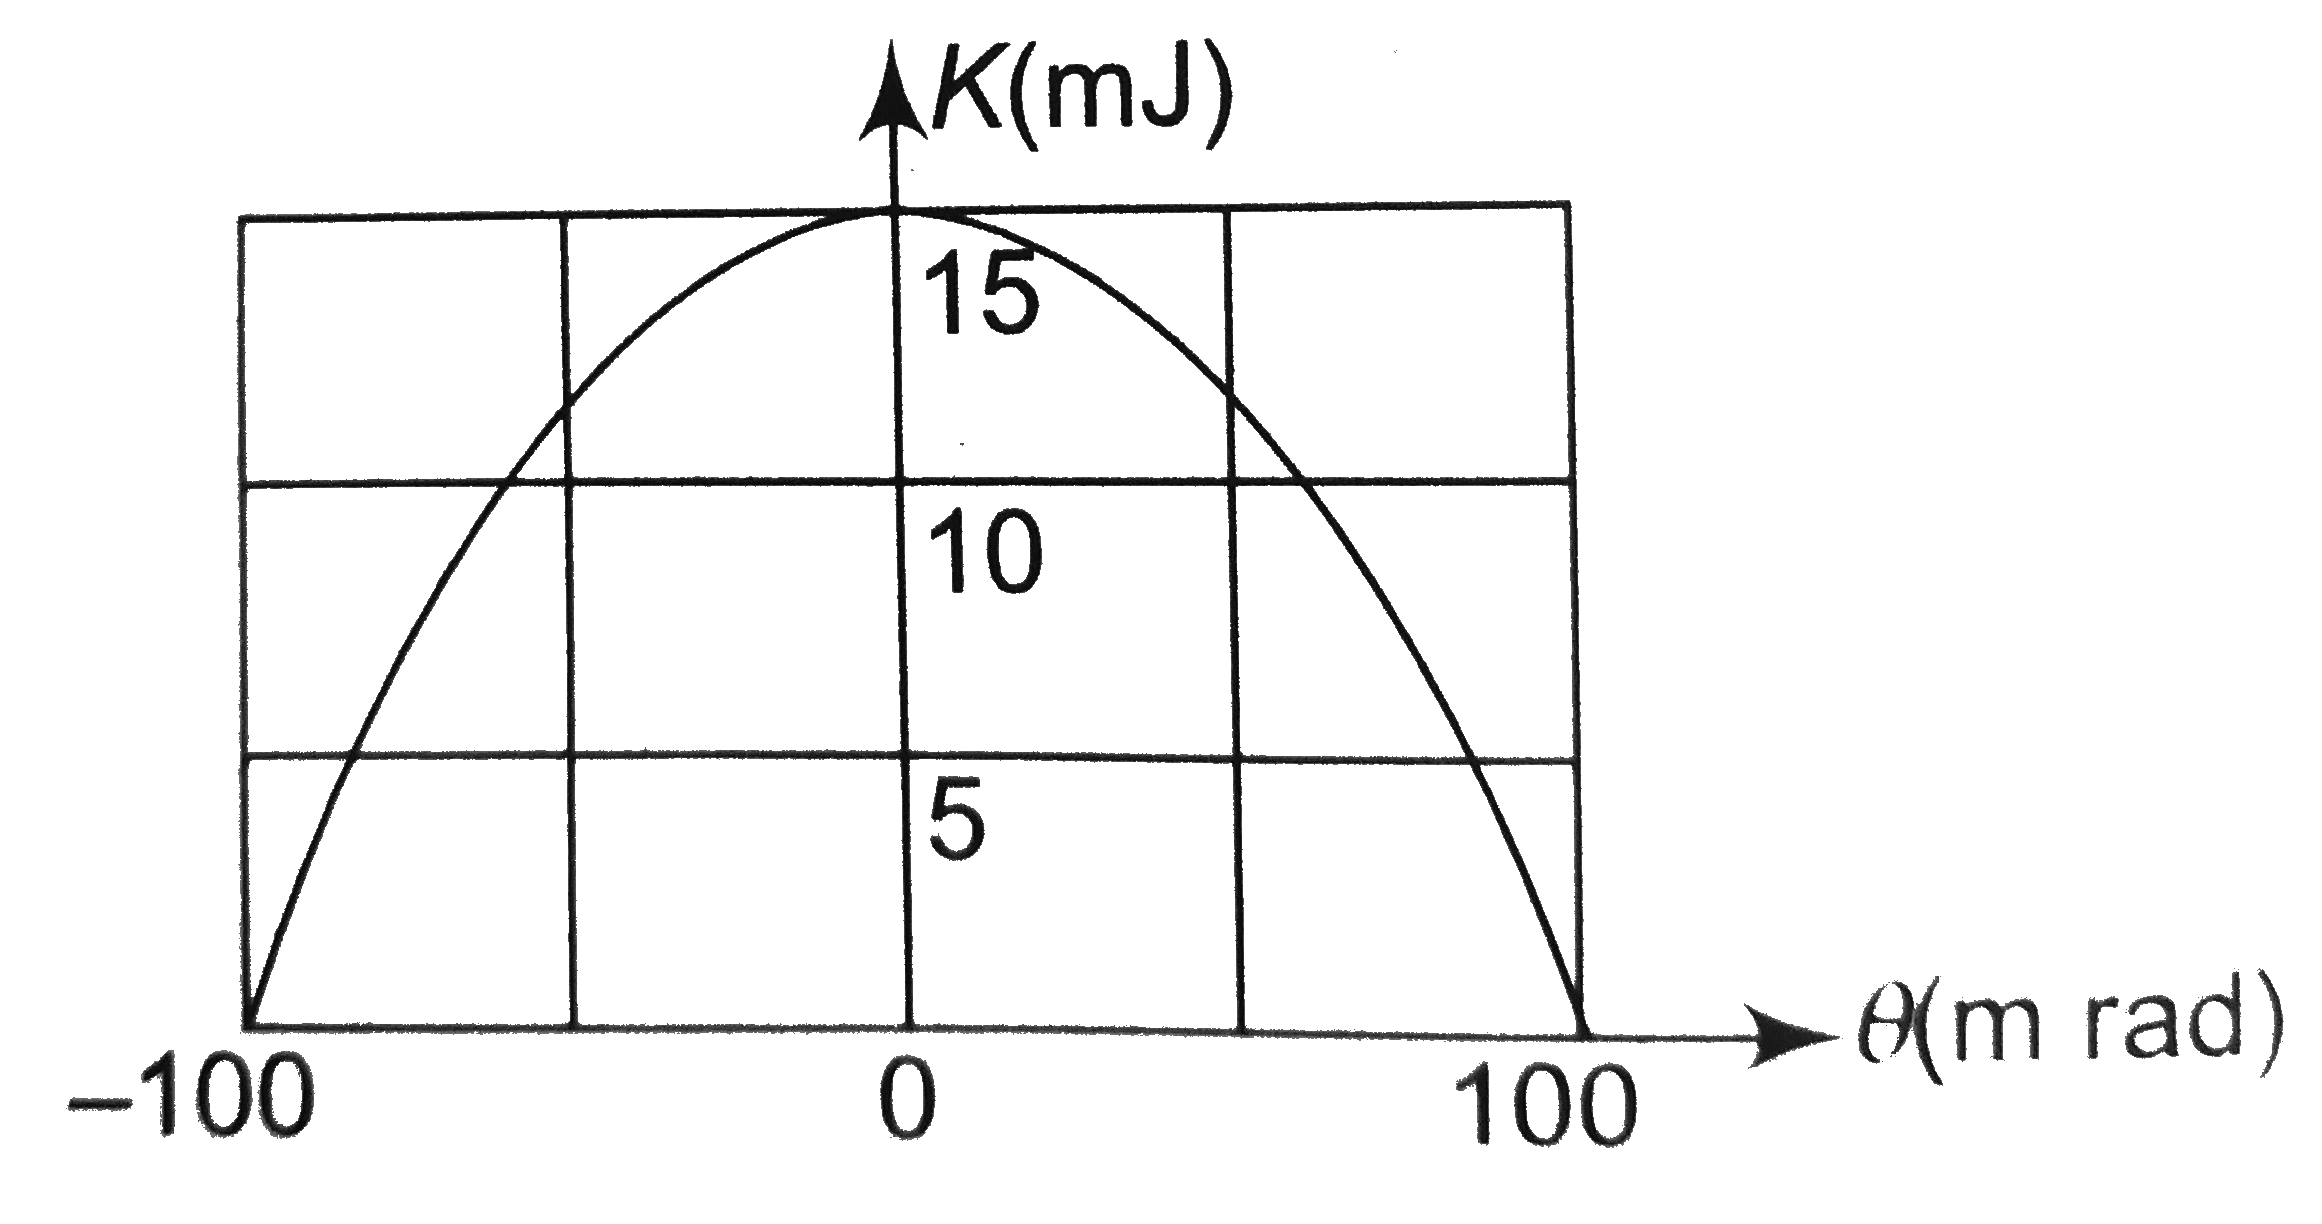 Figure shown the kinetic energy K of a pendulum versus. its angle theta from the vertical. The pendulum bob has mass 0.2kg The length of the pendulum is equal to (g = 10m//s^(2))  ,